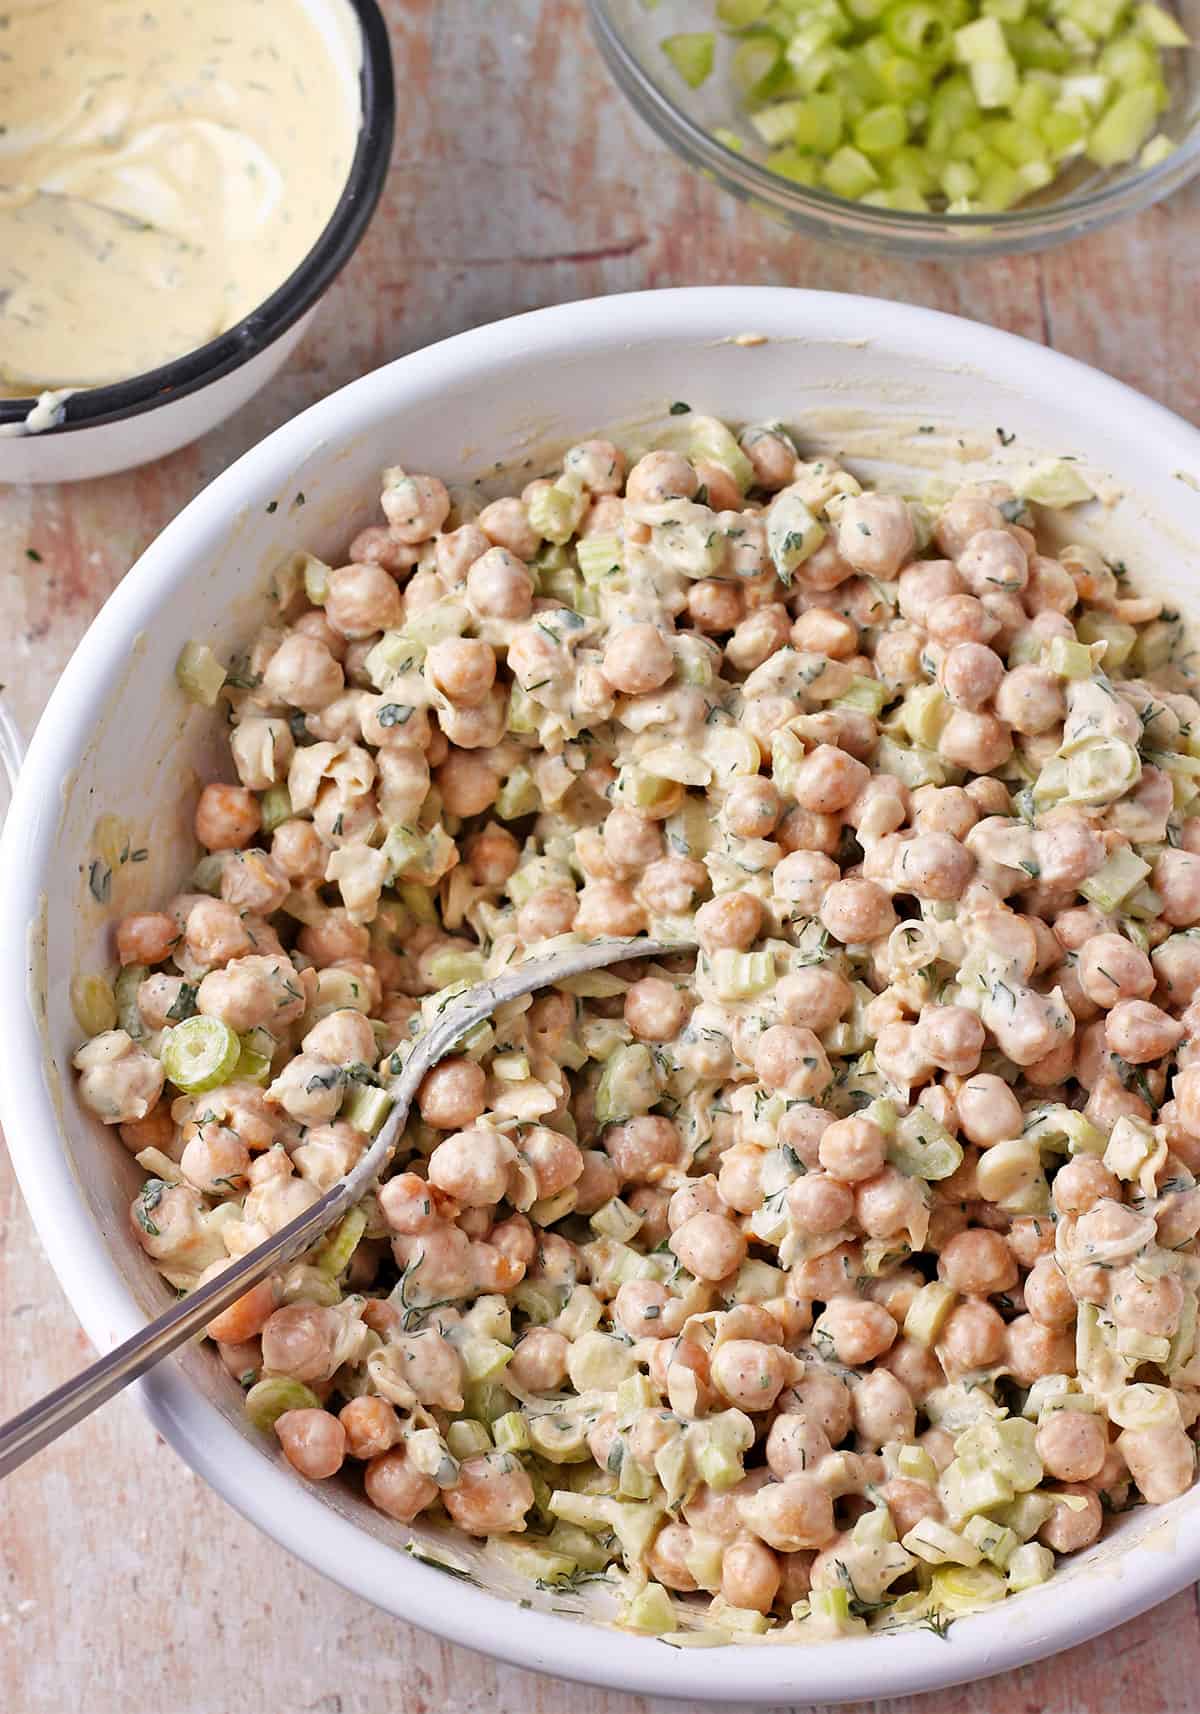 Creamy chickpea salad with celery and green onions in a white bowl with a spoon.